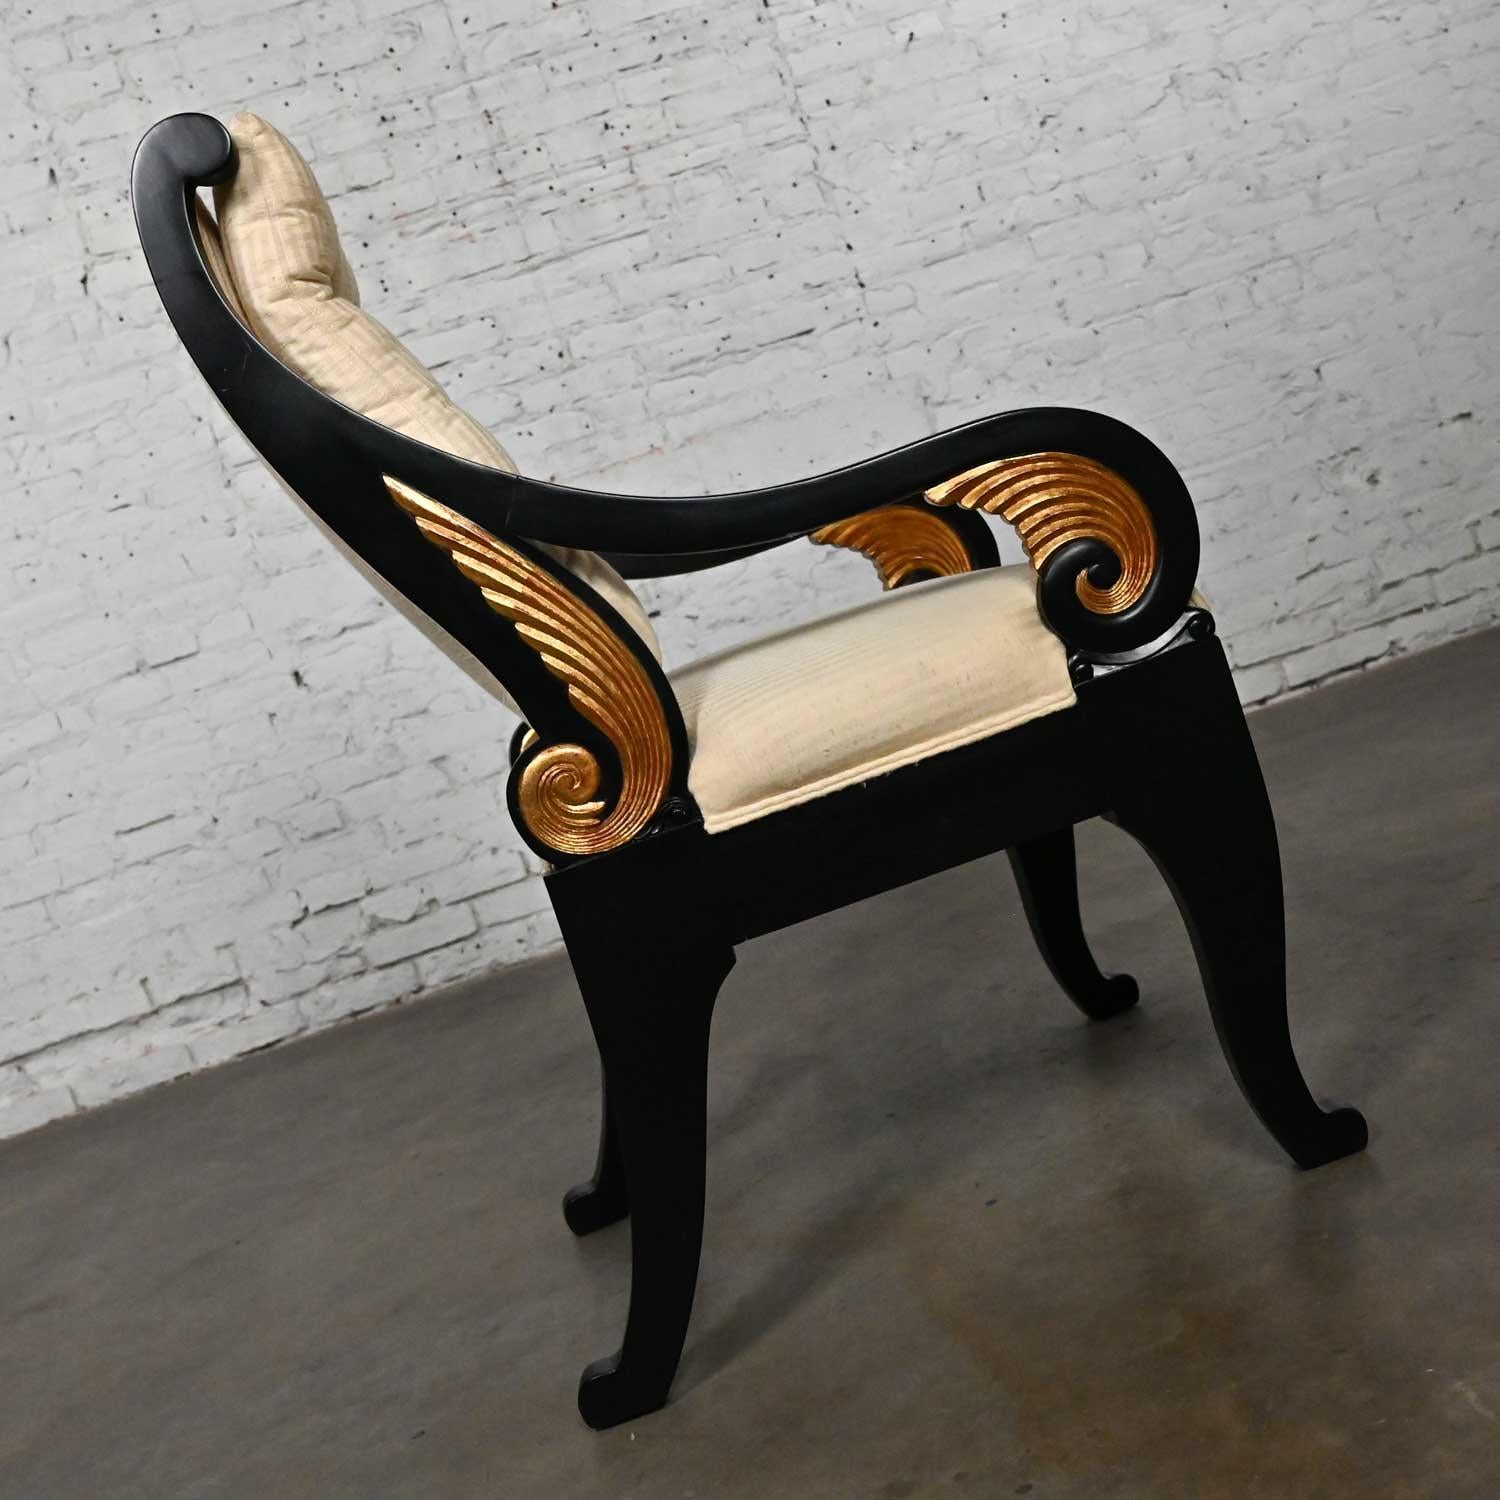 20th Century Late 20th Neoclassic Revival Black Side Chair Gilt Wing Accents Off-White Fabric For Sale